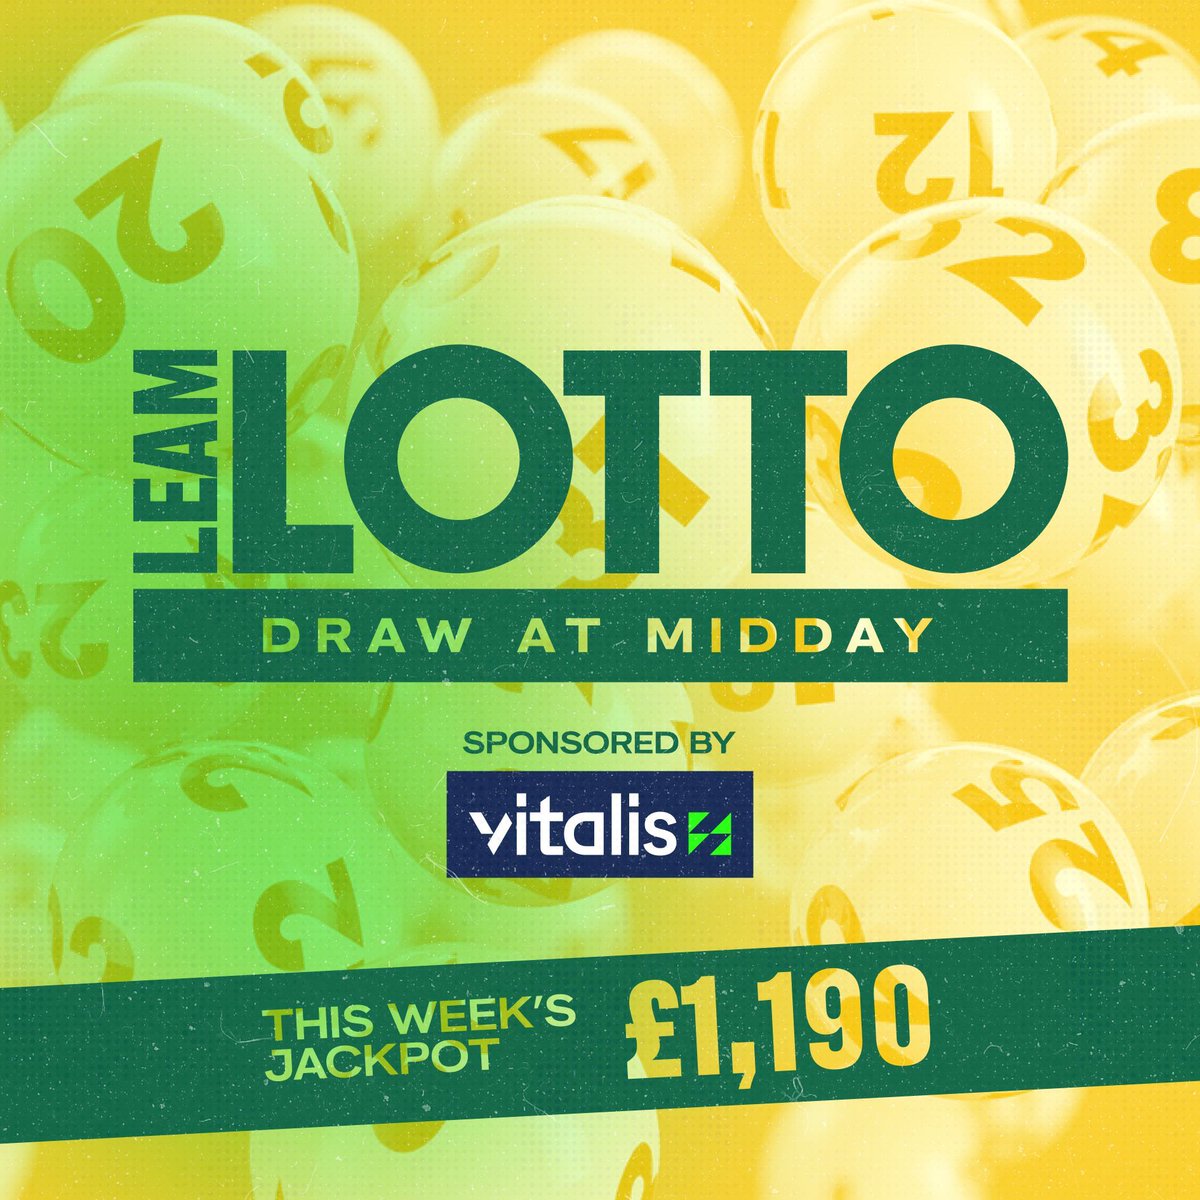 🟡🟢 𝗟𝗘𝗔𝗠 𝗟𝗢𝗧𝗧𝗢 — The payment issues over the last few weeks seem to have been fixed, so here's your reminder to get your lines purchased for the draw at midday and a chance to with the £1,190 Jackpot. Pick your numbers 👉 buff.ly/4a6LKgf #UpTheLeam #UTL 🔰